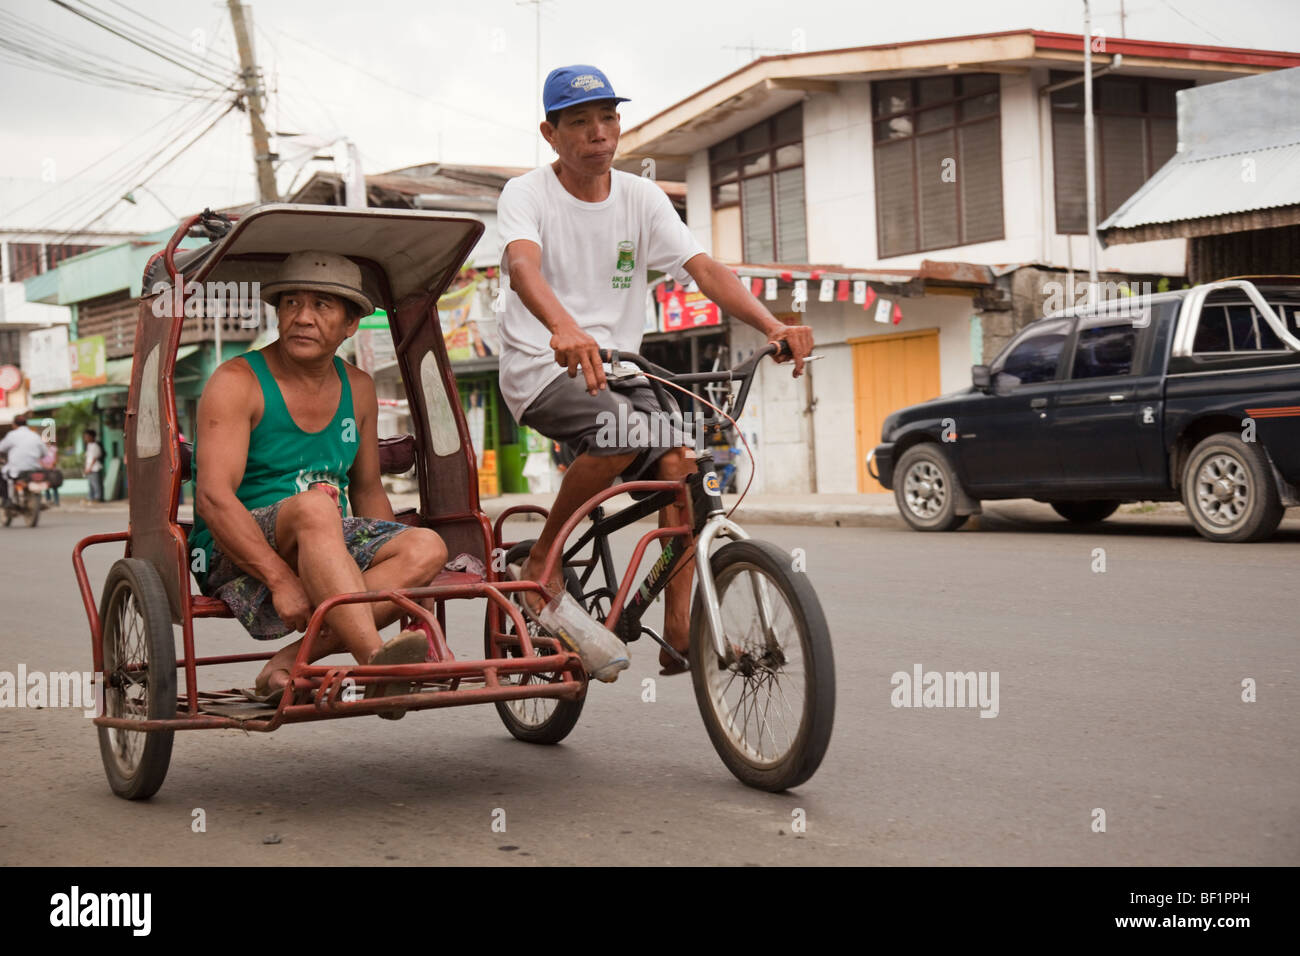 Man riding in a tricycle taxi. Passi City Iloilo Philippines Stock Photo